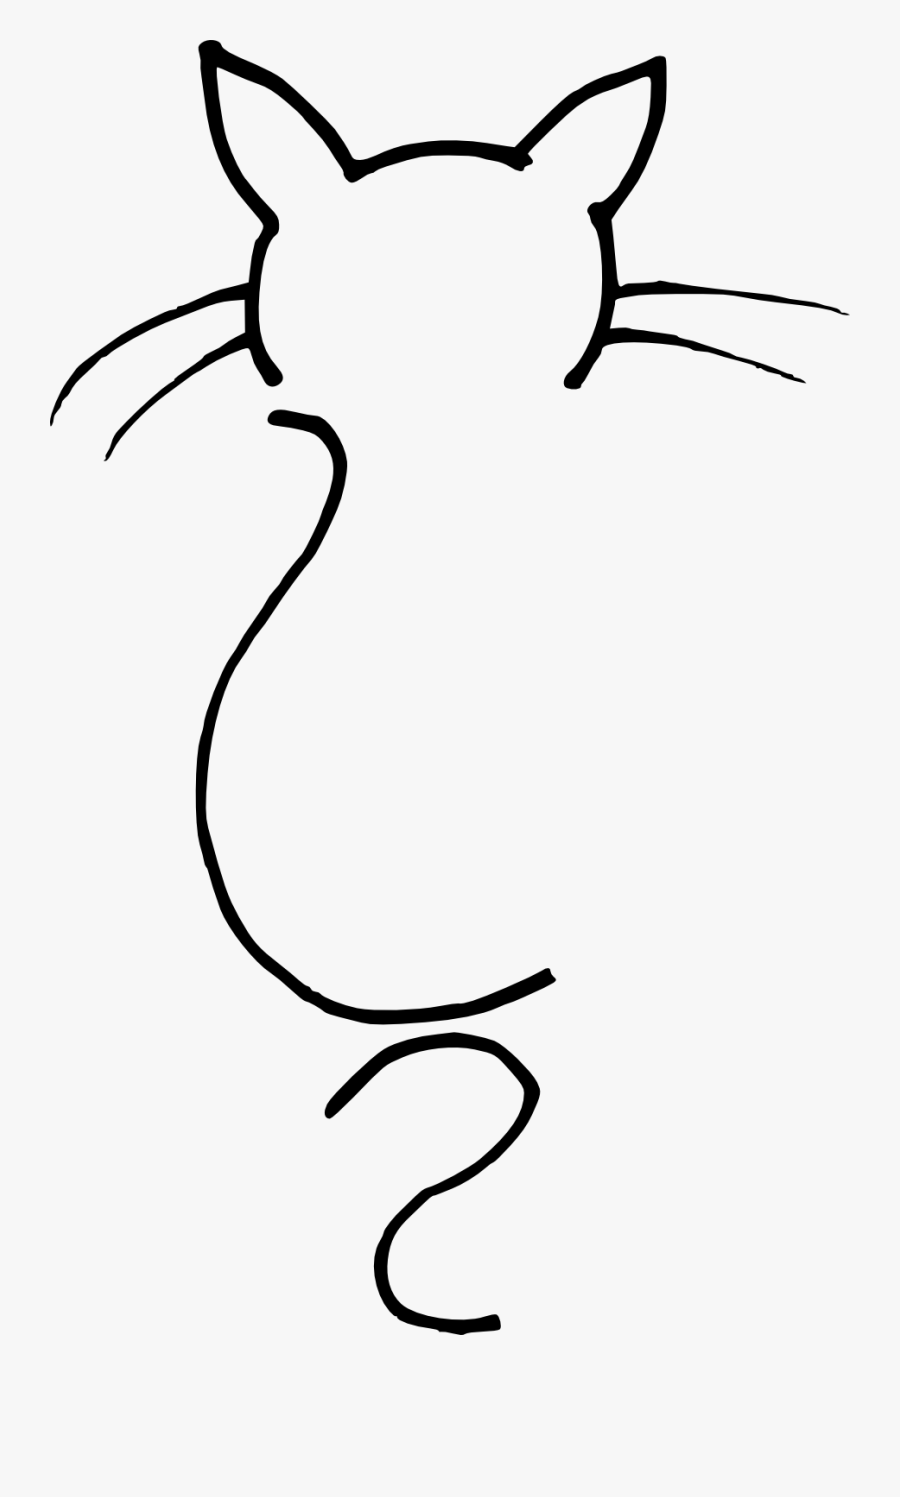 Cat Whiskers Png - Cute Cat Whiskers Png, Transparent Clipart